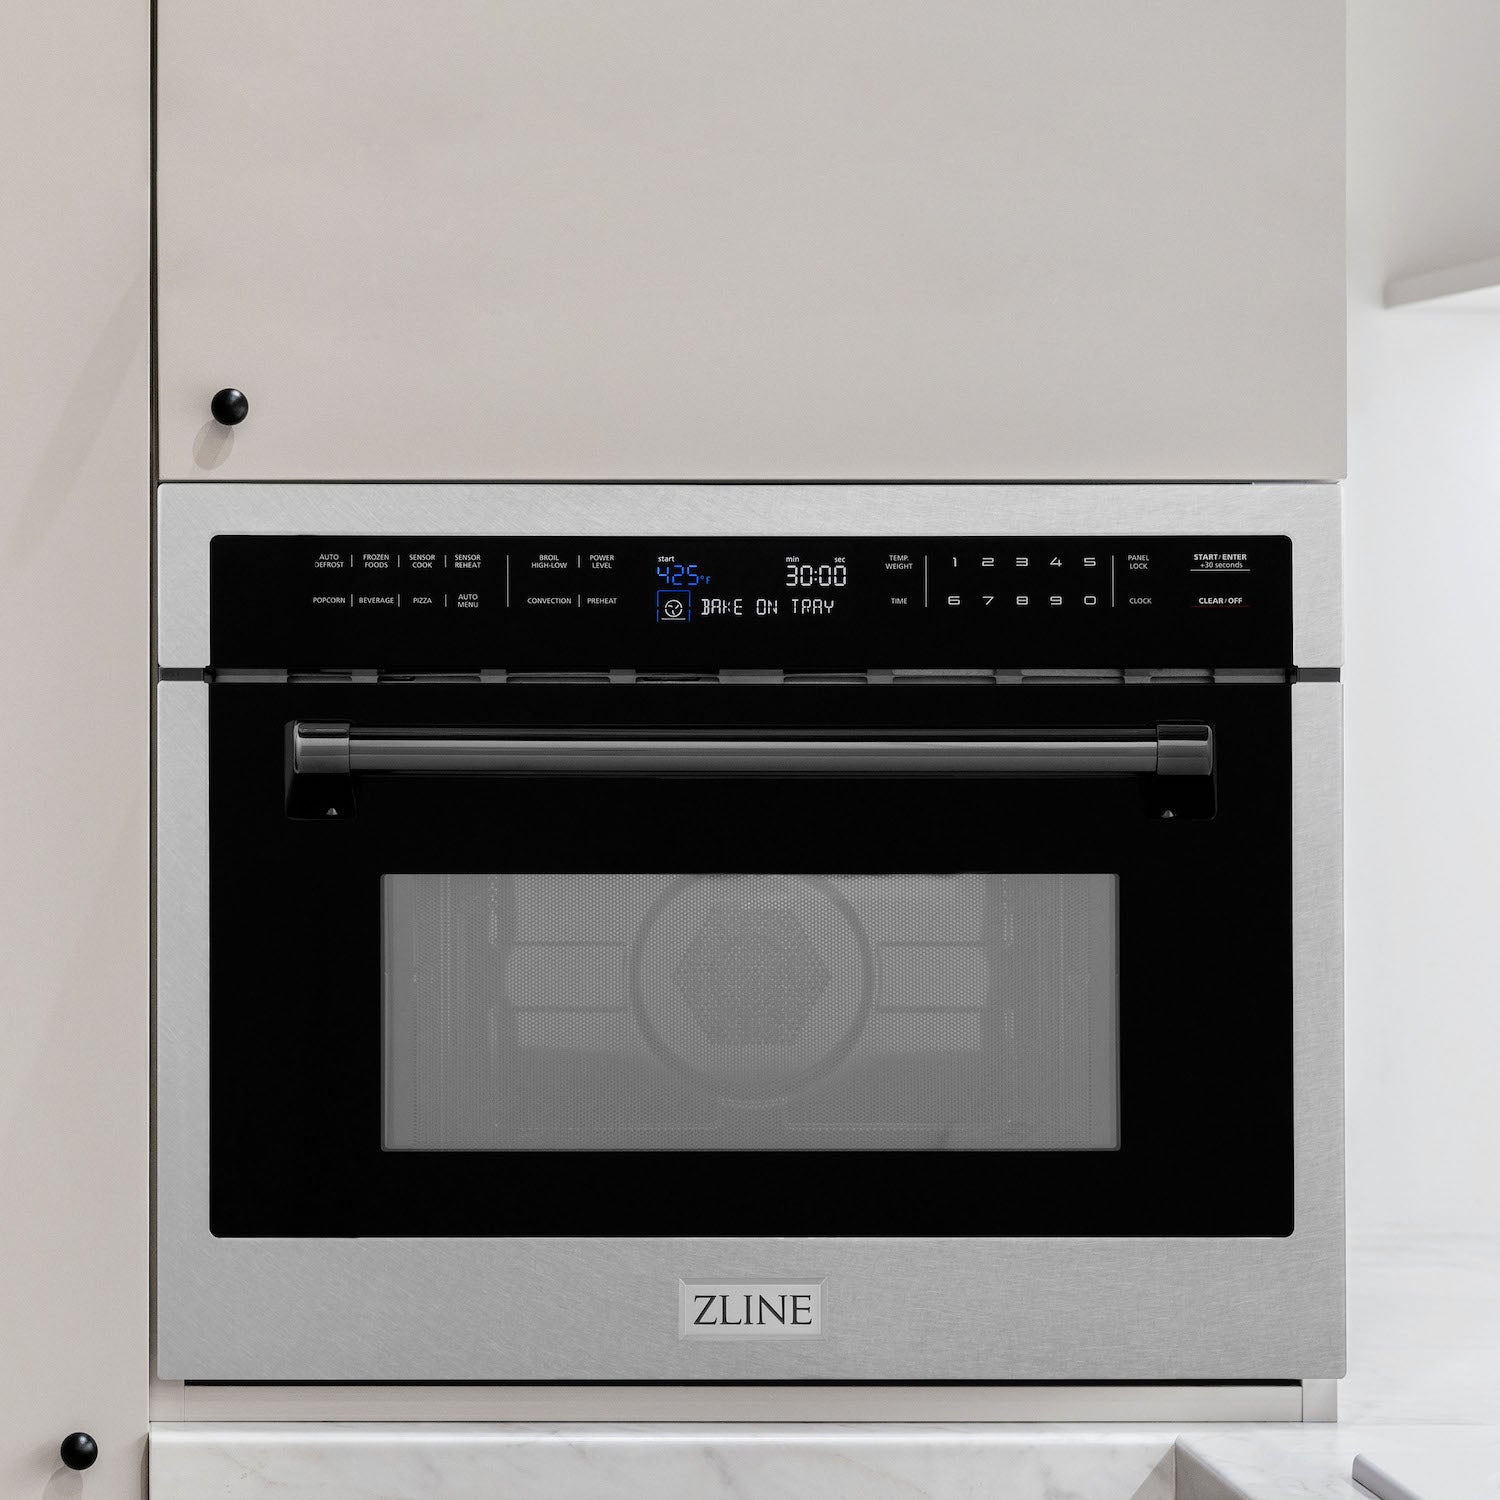 ZLINE Autograph Edition 24 in. 1.6 cu ft. Built-in Convection Microwave Oven in DuraSnow Stainless Steel with Matte Black Accents built-in to white kitchen wall.